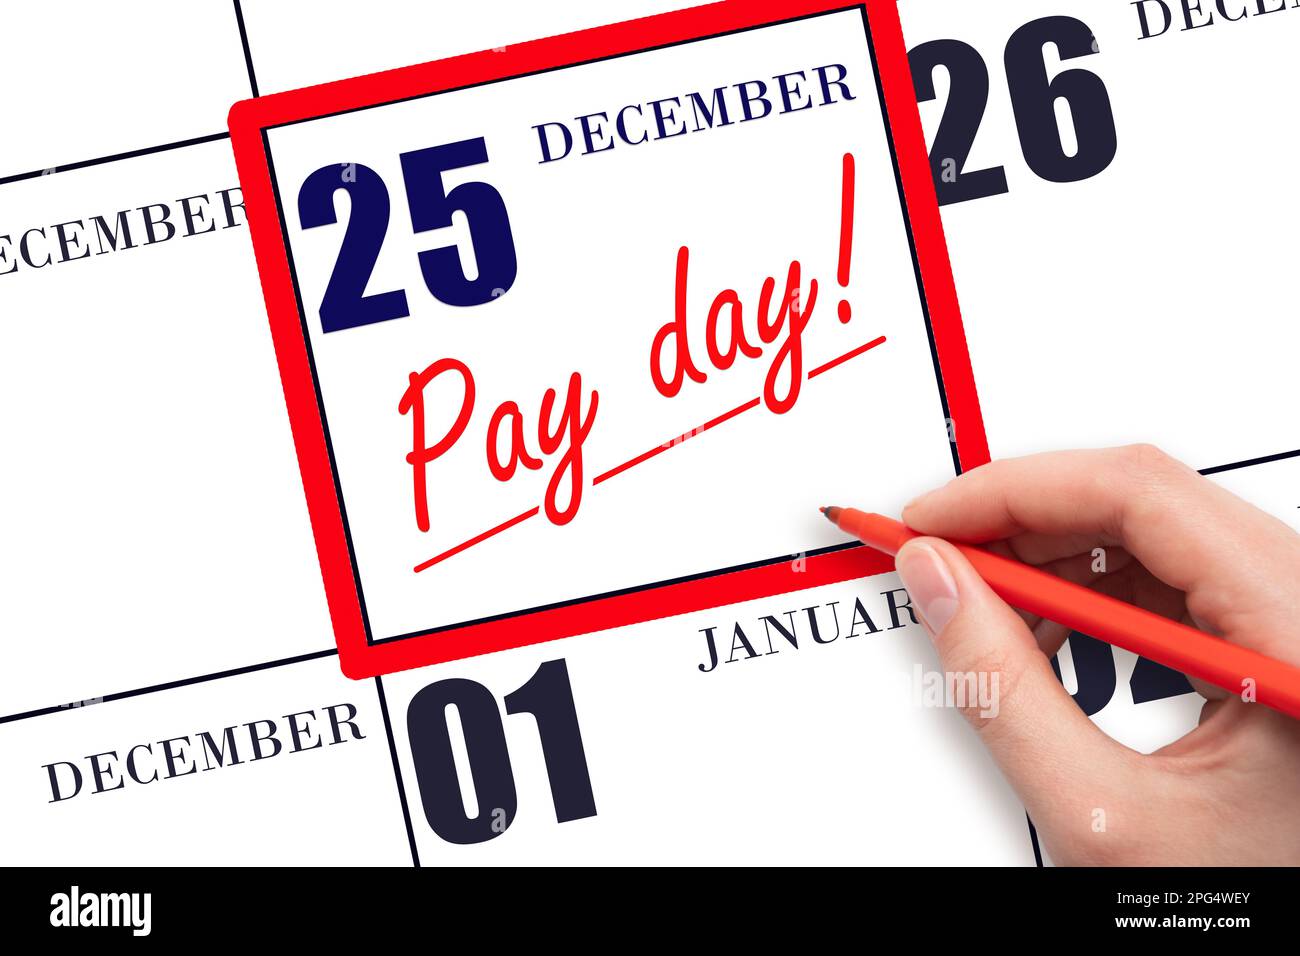 25th day of December. Hand writing text PAY DATE on calendar date December 25 and underline it. Payment due date. Reminder concept of payment. Winter Stock Photo